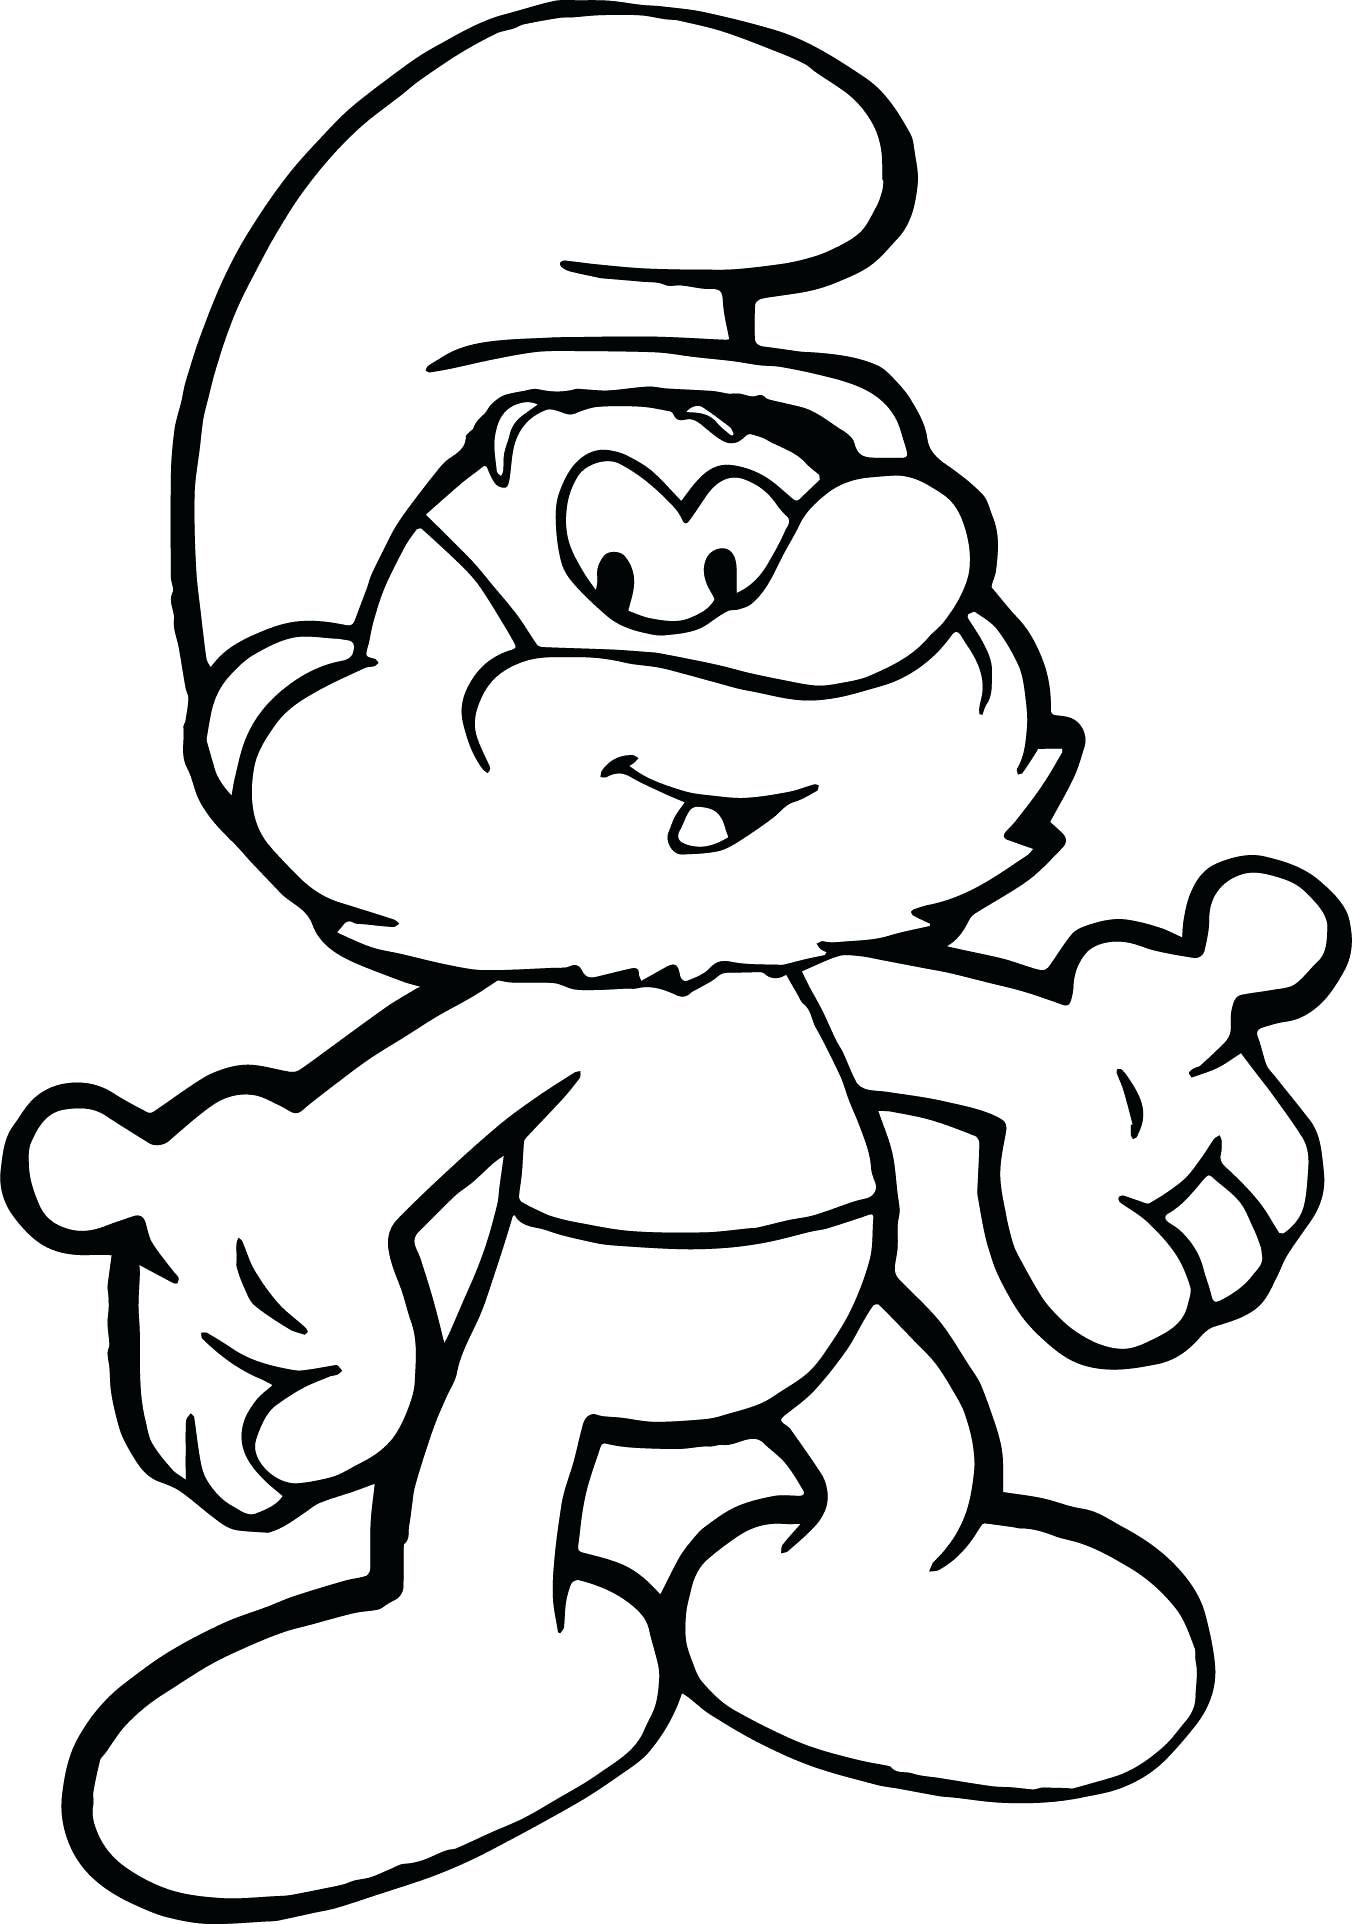 Awesome coloring pages smurfs in the world learn more here cartoon coloring pages coloring pages for kids coloring pages to print